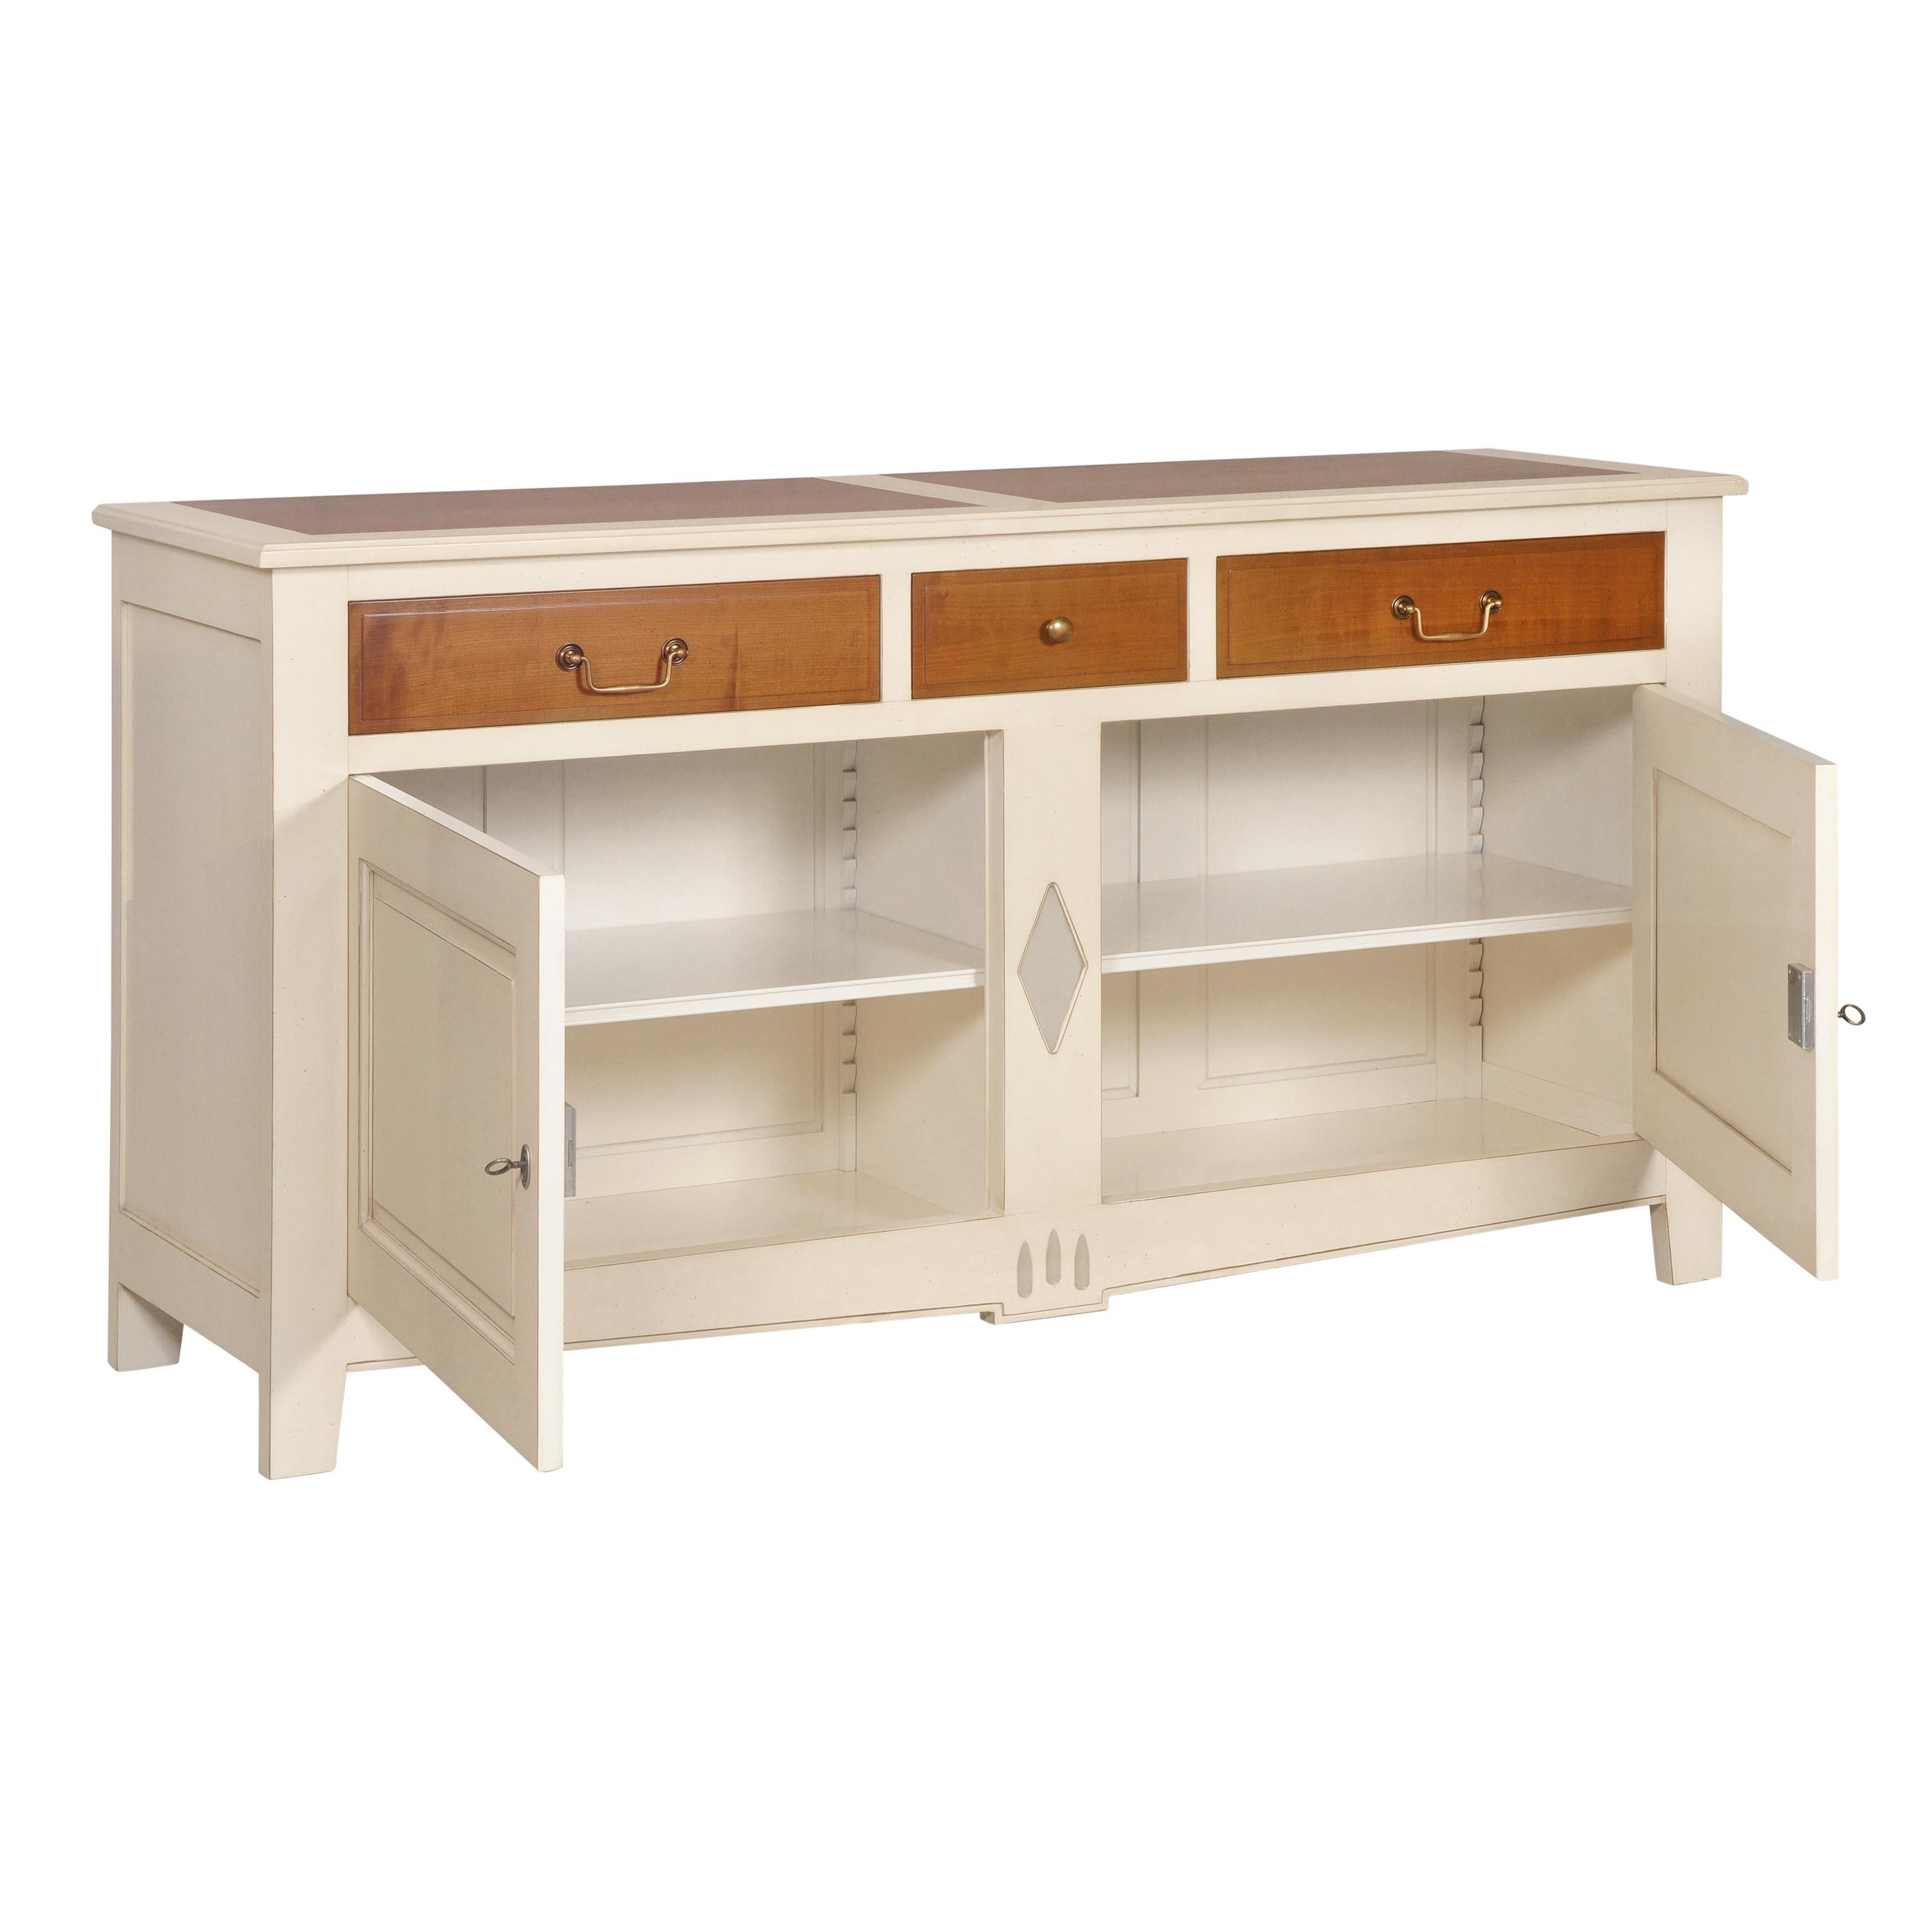 This 2 doors sideboard is a handmade and modernized interpretation of the French Directoire style at the end of the 18th century. This period is remarkable with its straight, classical and timeless lines.

This traditional buffet features 3